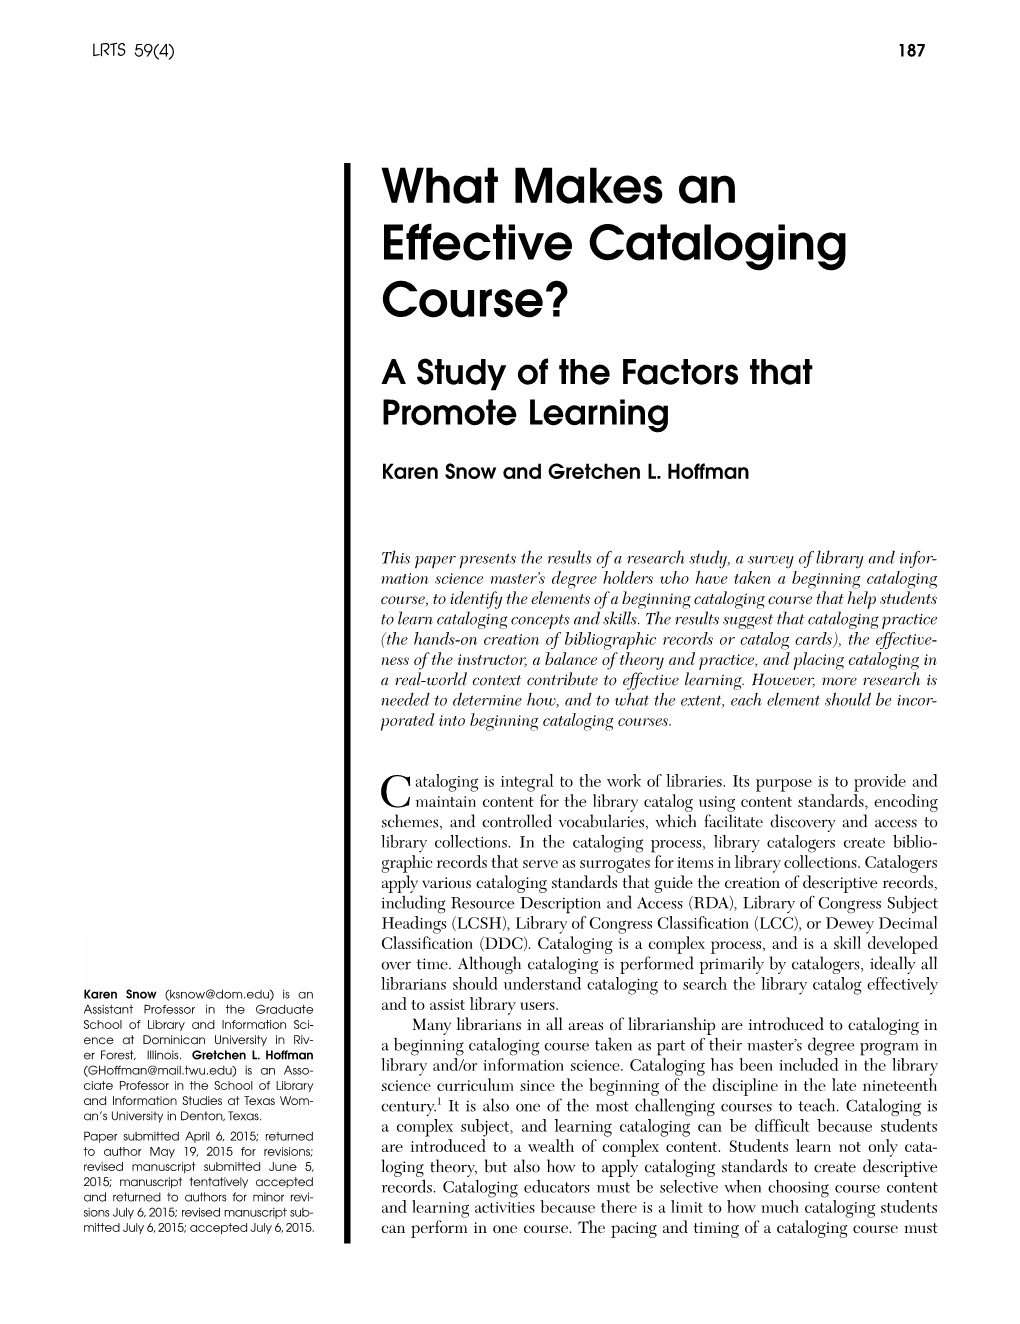 What Makes an Effective Cataloging Course? a Study of the Factors That Promote Learning